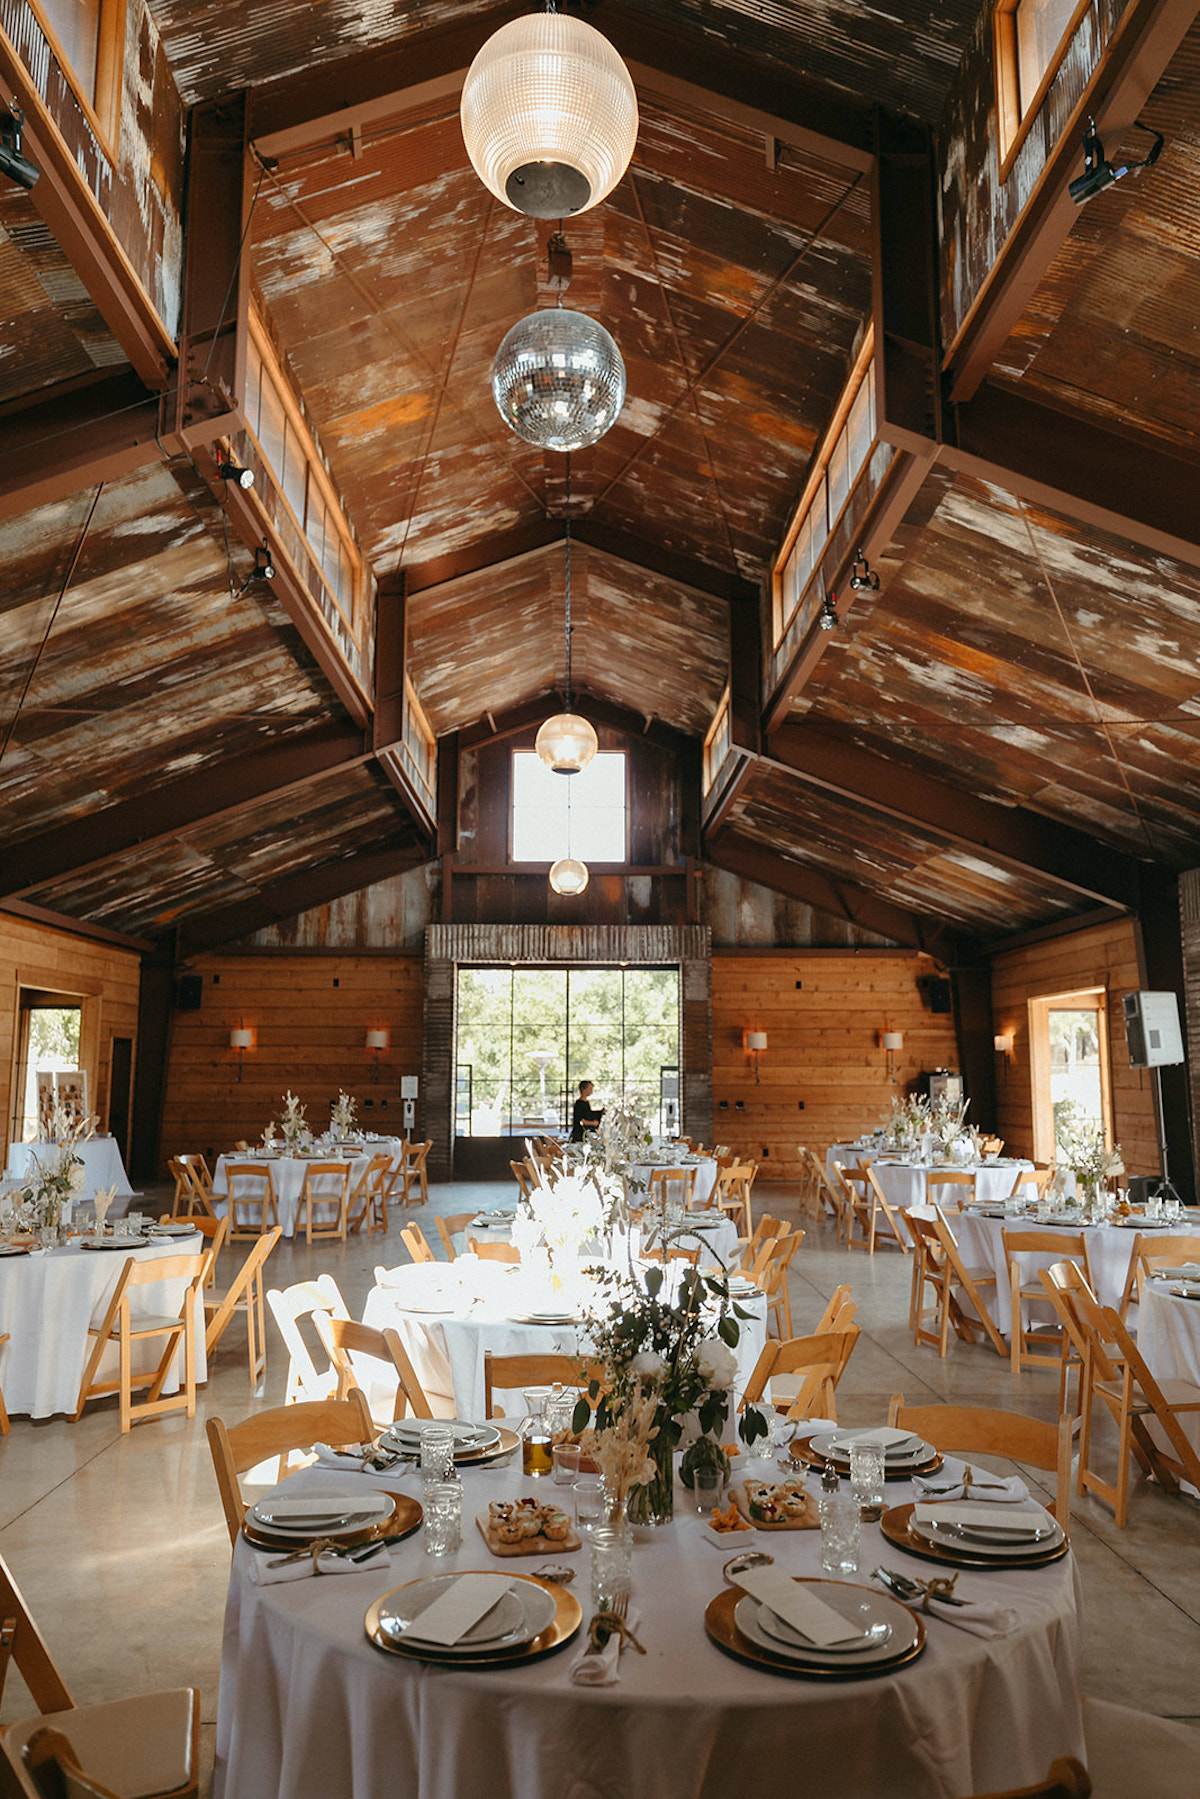 How to incorporate disco balls into your barn wedding